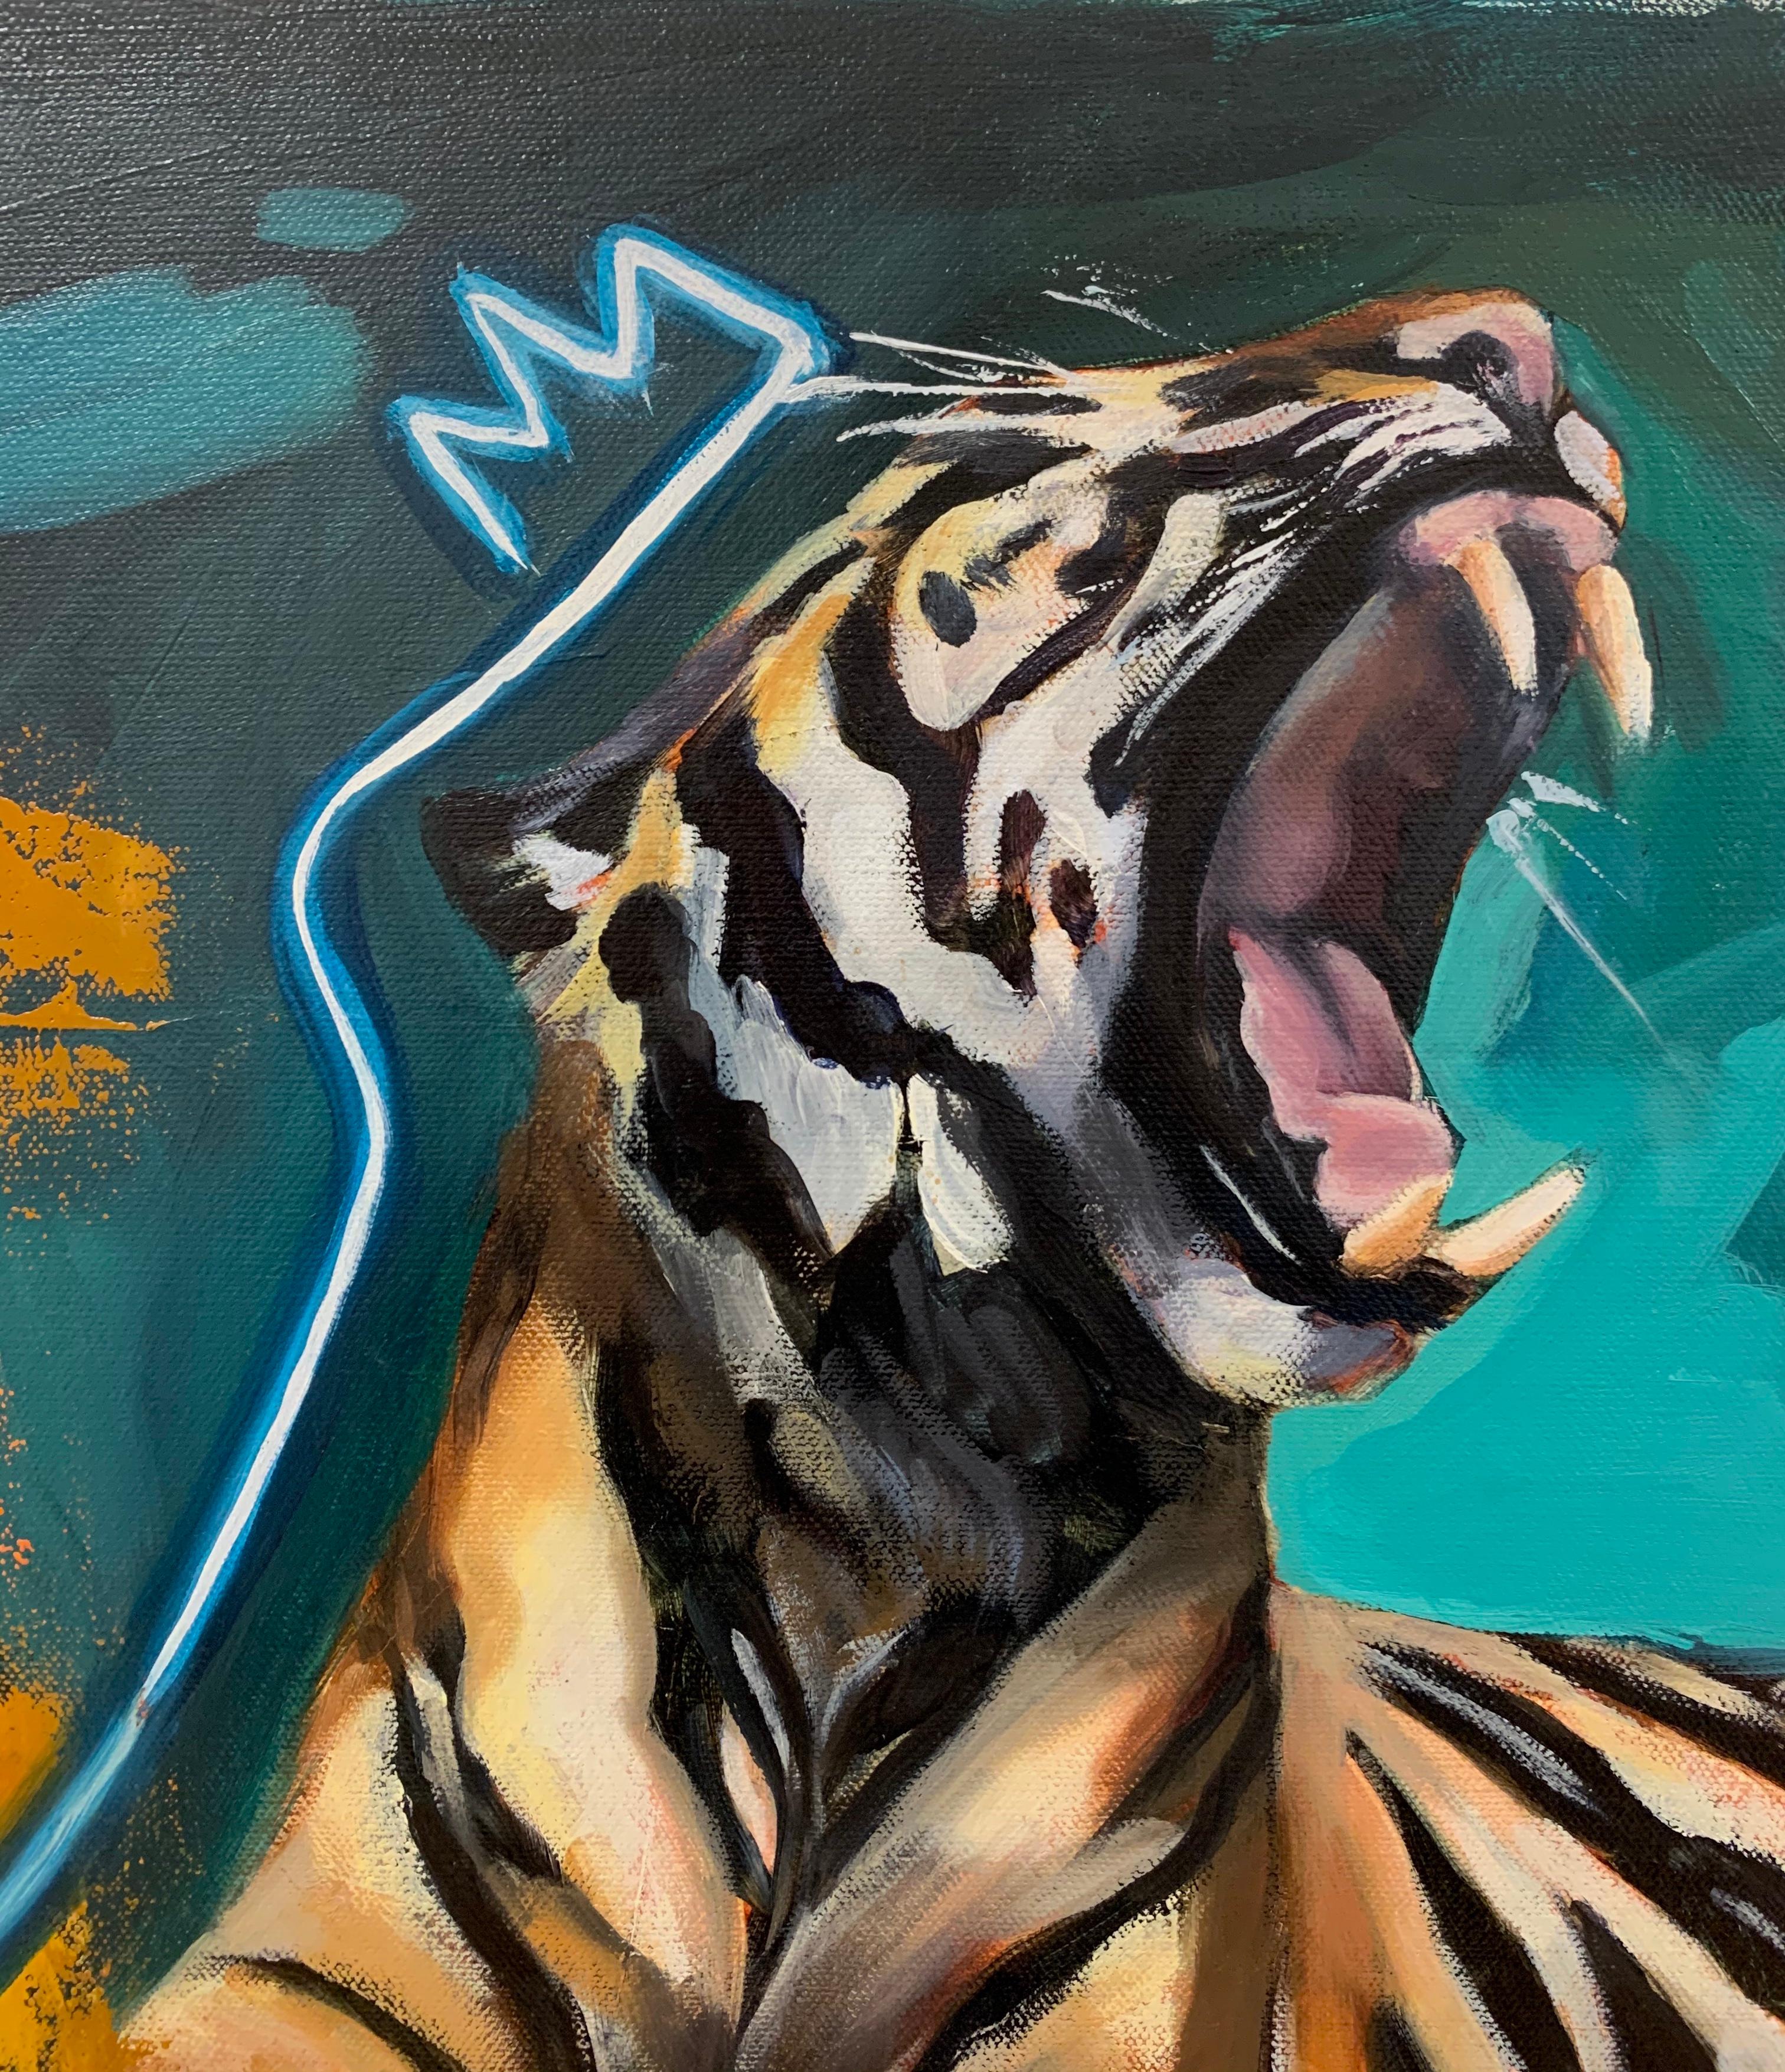 <p>Artist Comments<br /> When asked about this graphic contemporary portrait of a tiger, artist Miranda Gamel shared this poem:  He is Royalty. He glows and shines, illuminating the path to true and pure.  His words are a soft breeze, and a